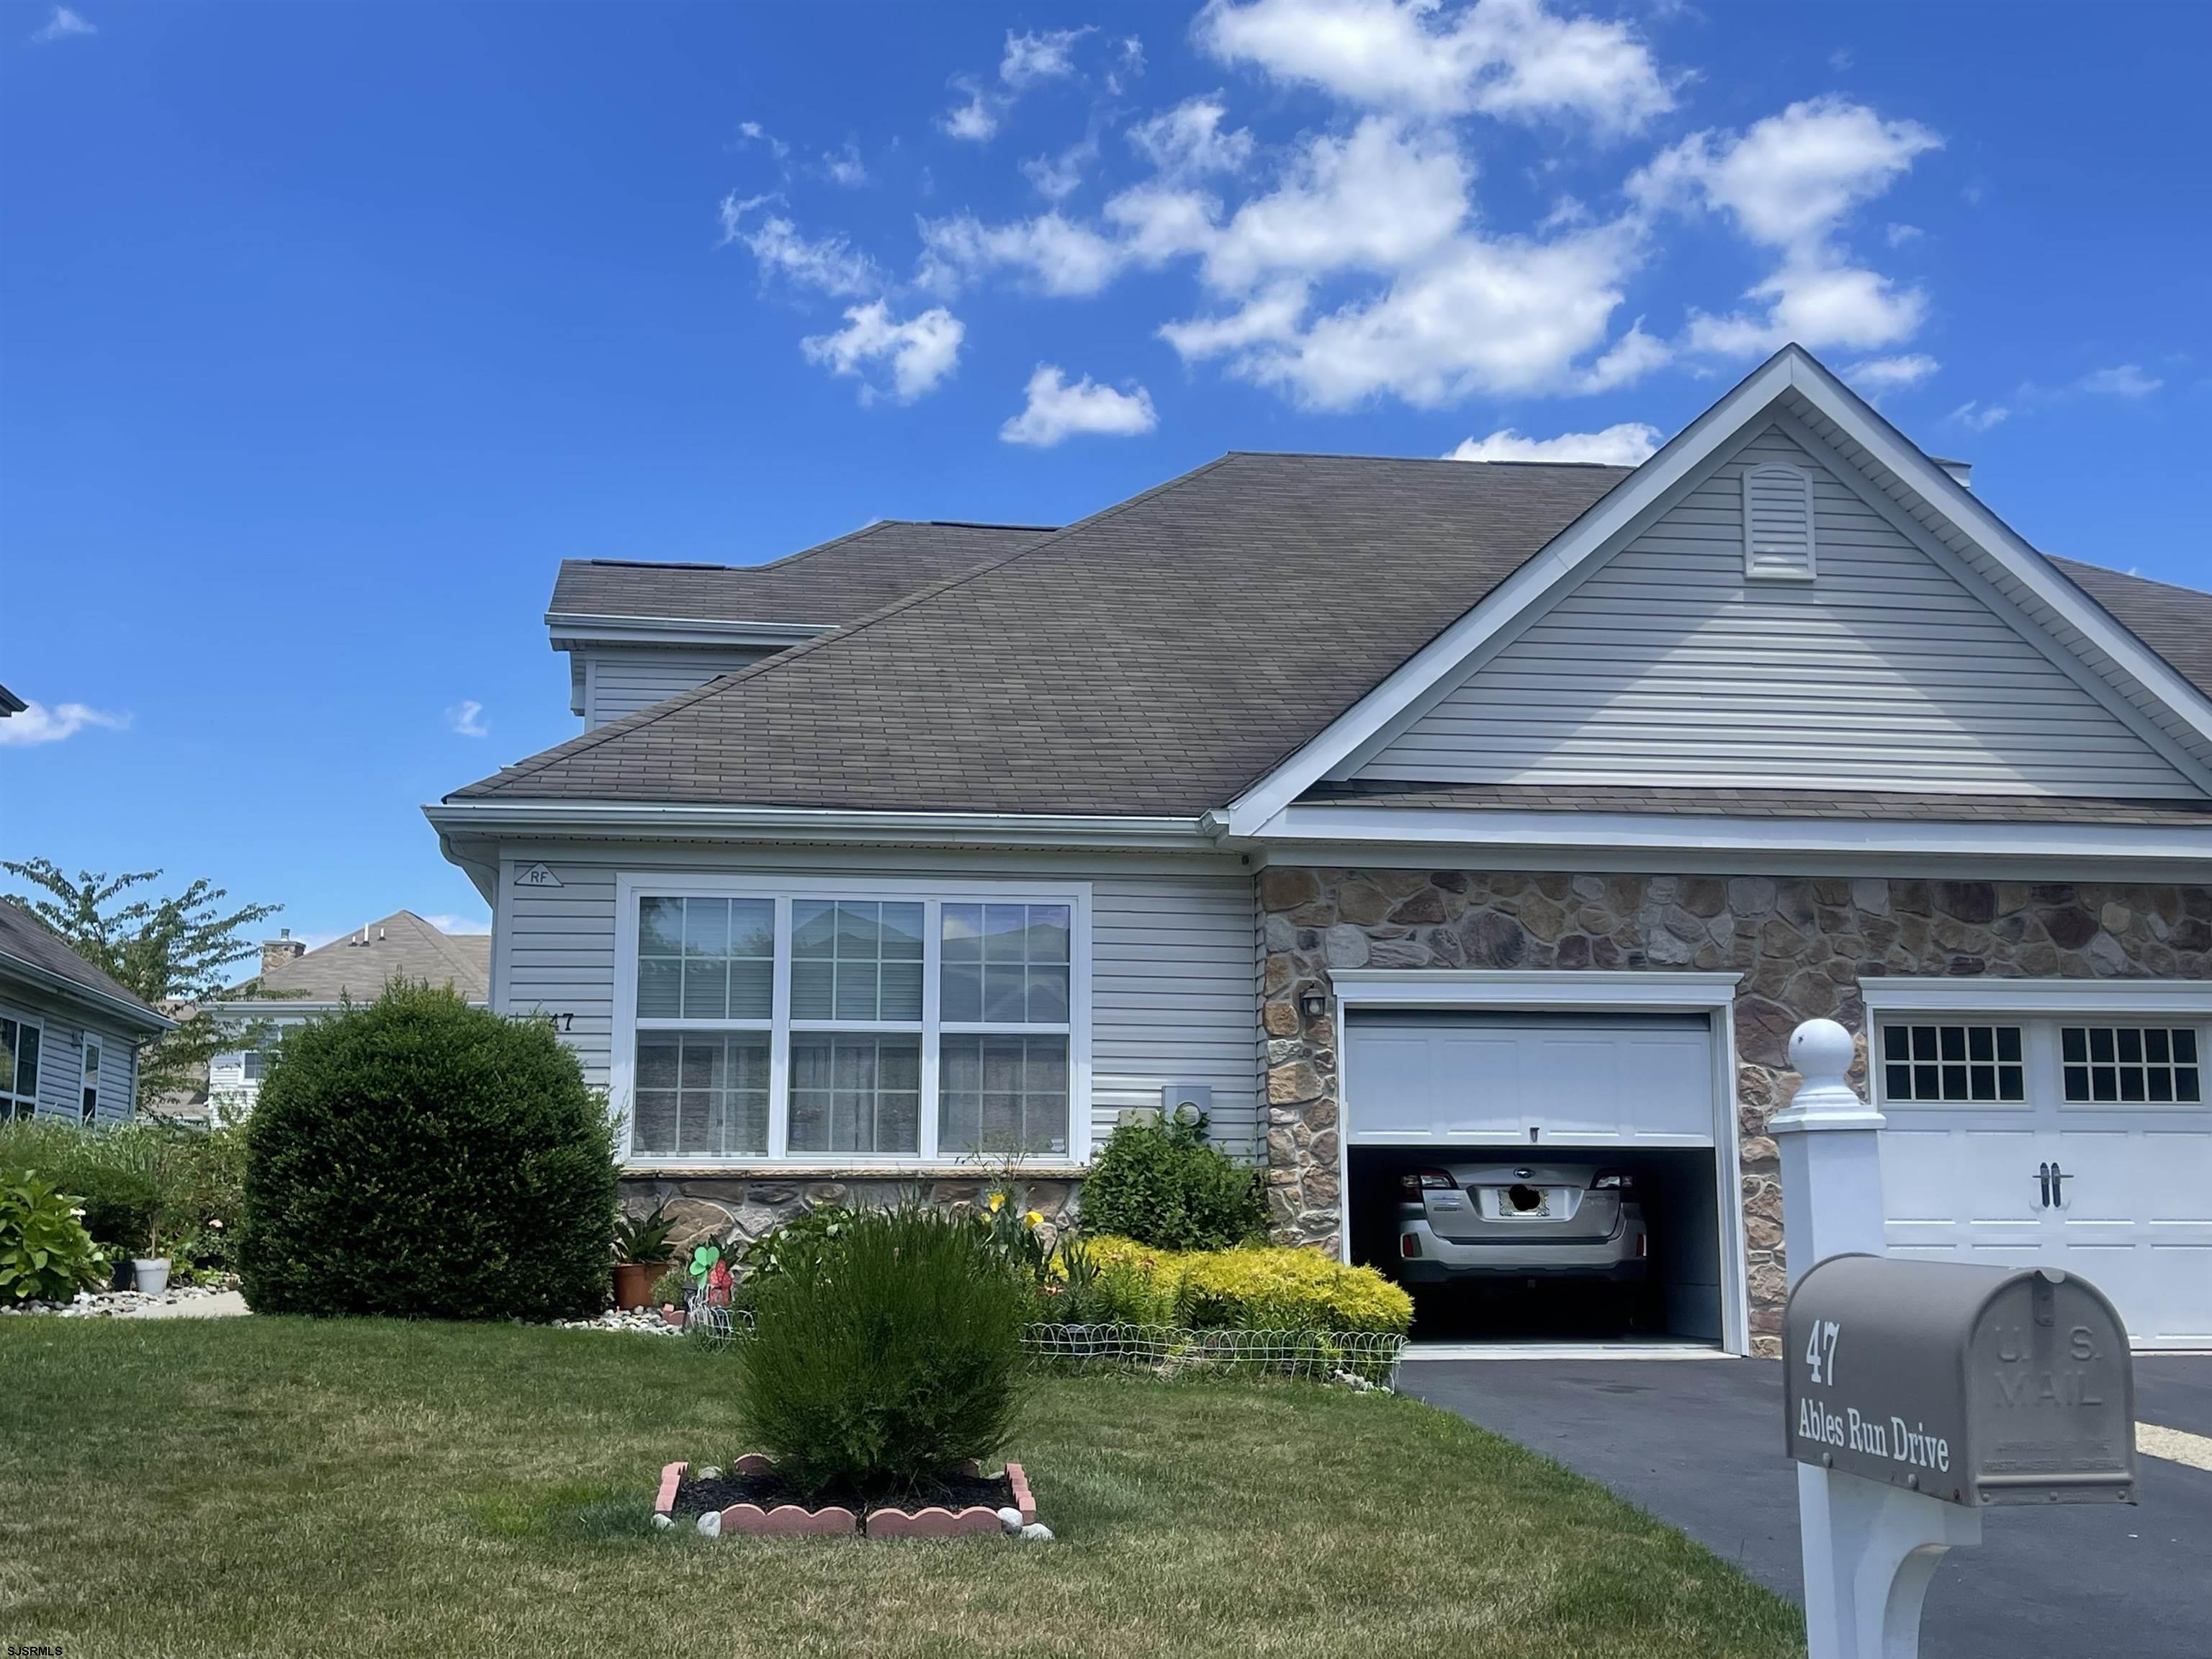 47 Ables Run Dr, Absecon, NJ 08201